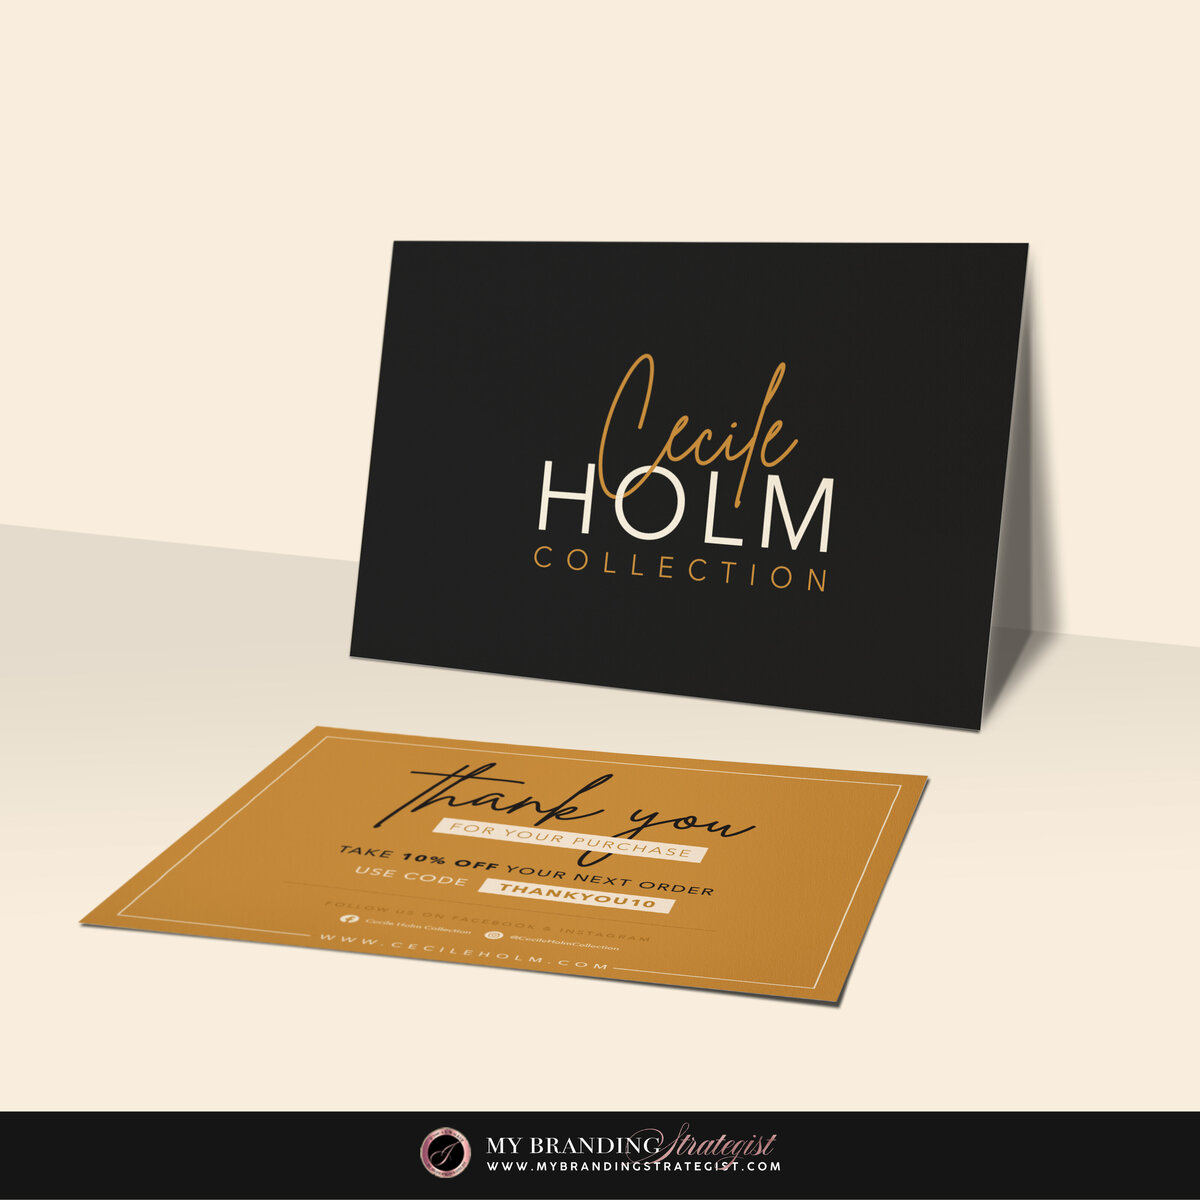 MOCKUP - Thank You Card-02 - CECILE HOLM